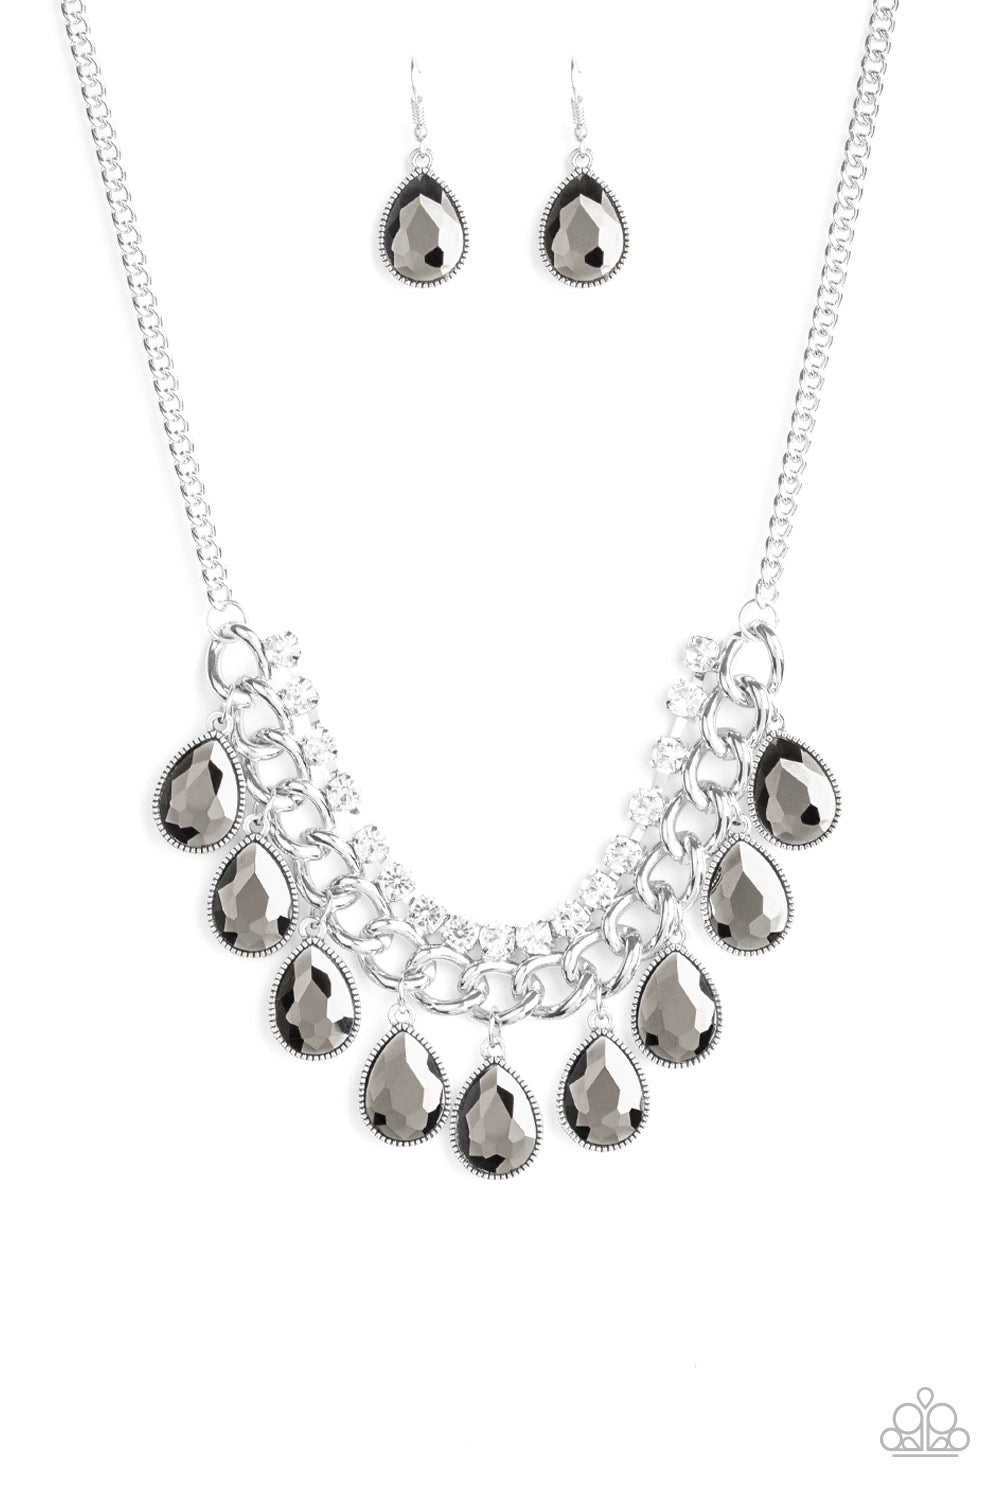 All Together-HEIR Now Silver-Necklace